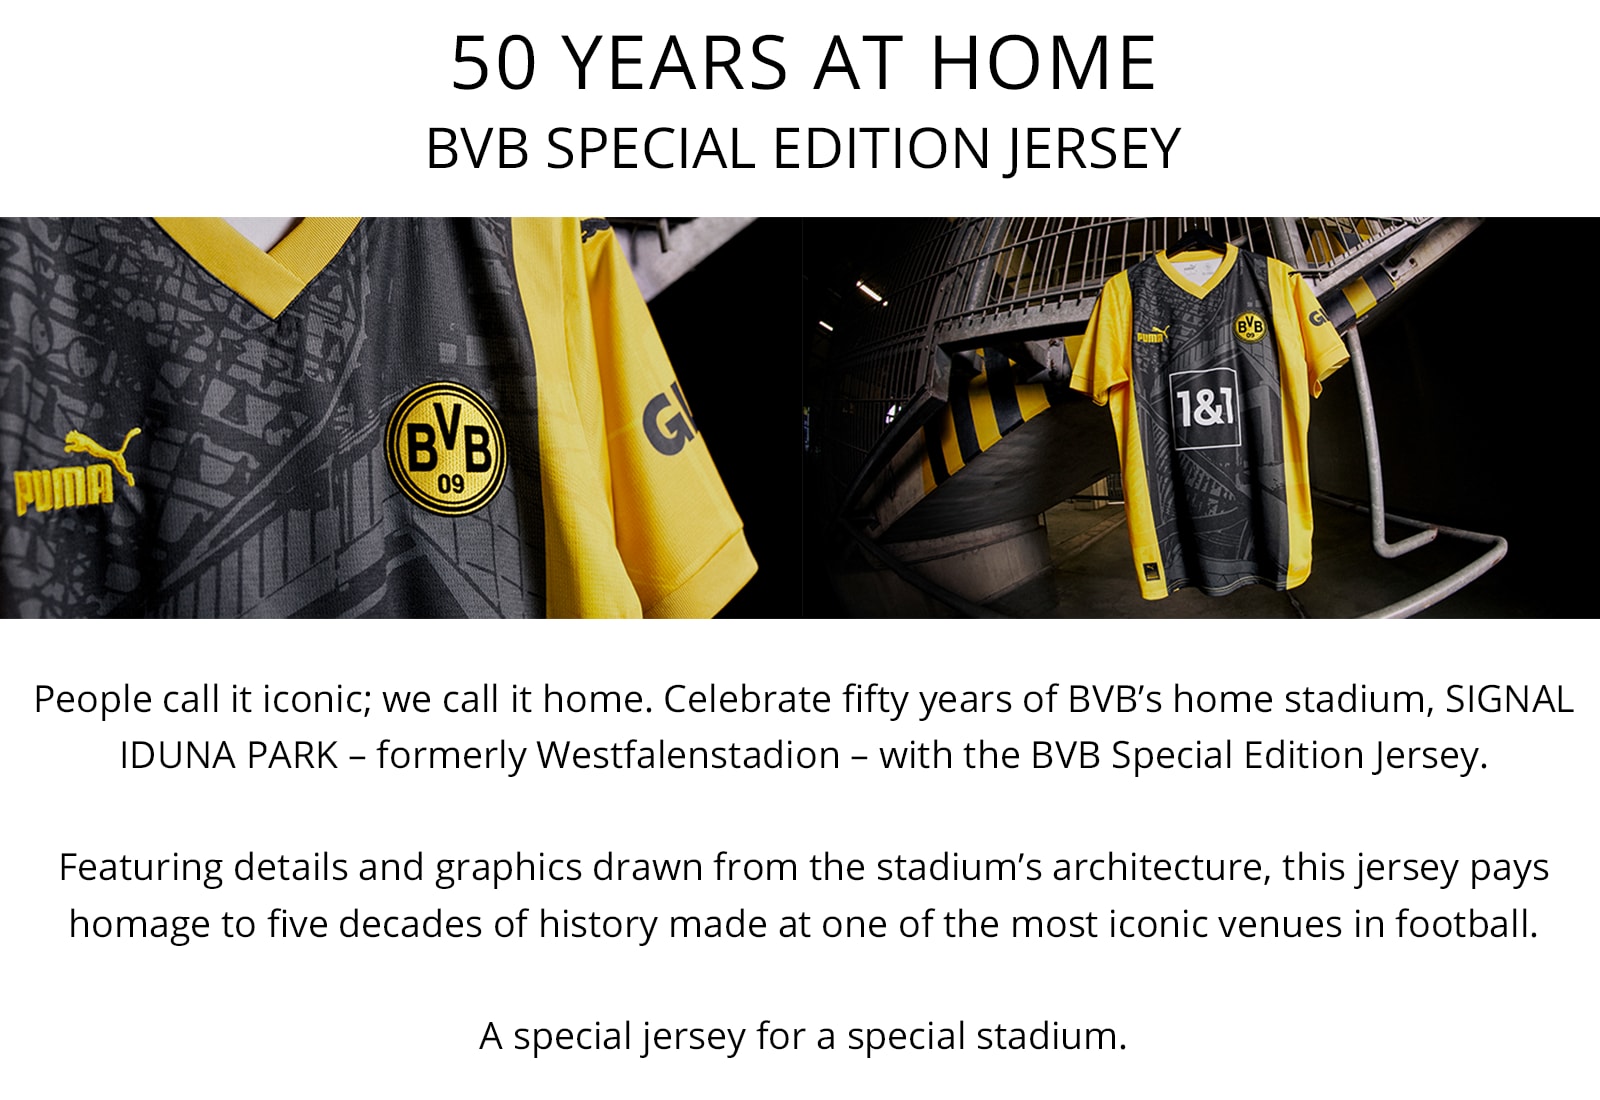 BVB Special Edition